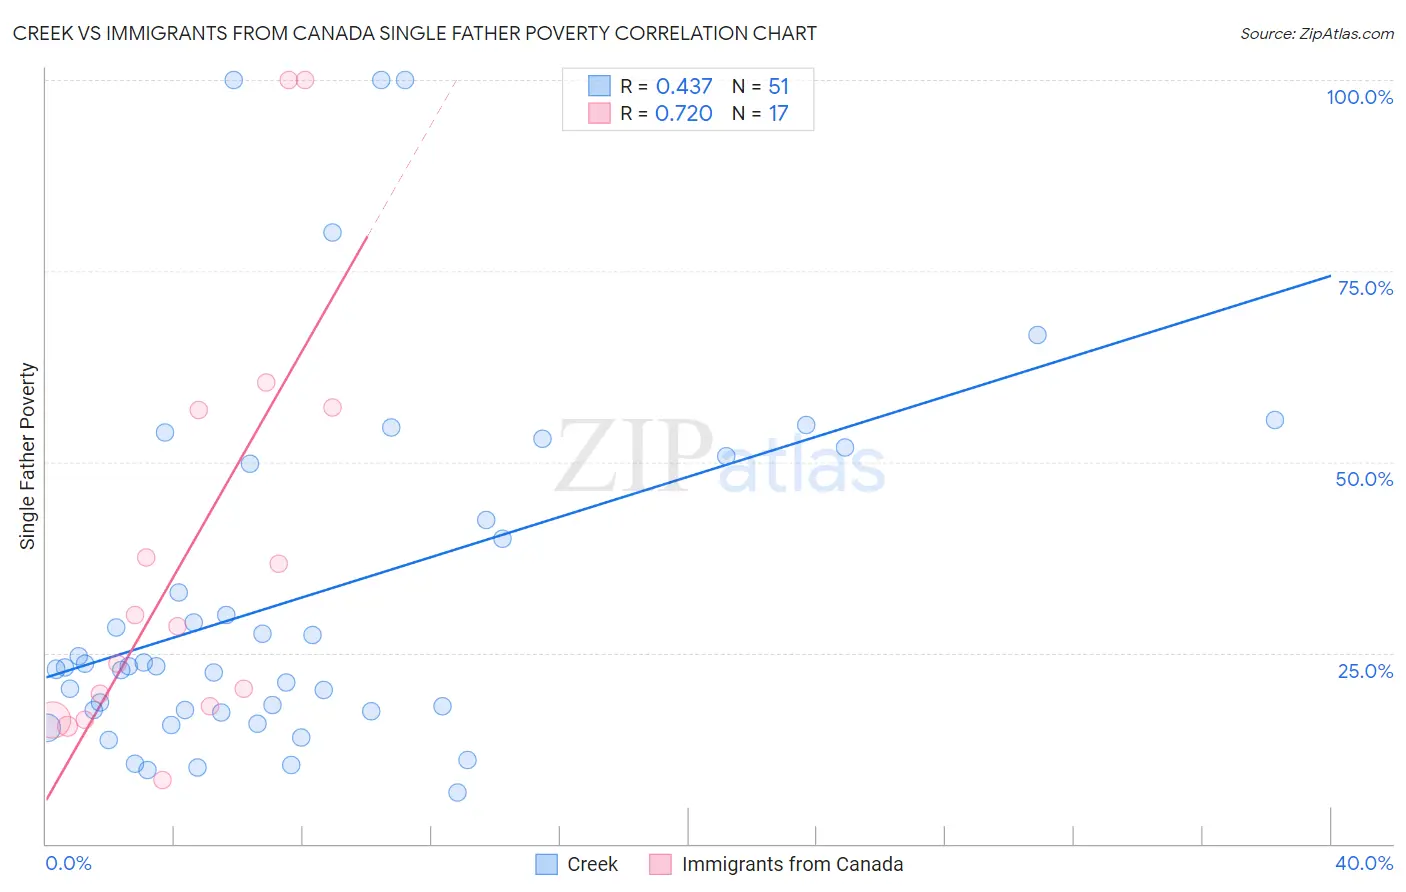 Creek vs Immigrants from Canada Single Father Poverty